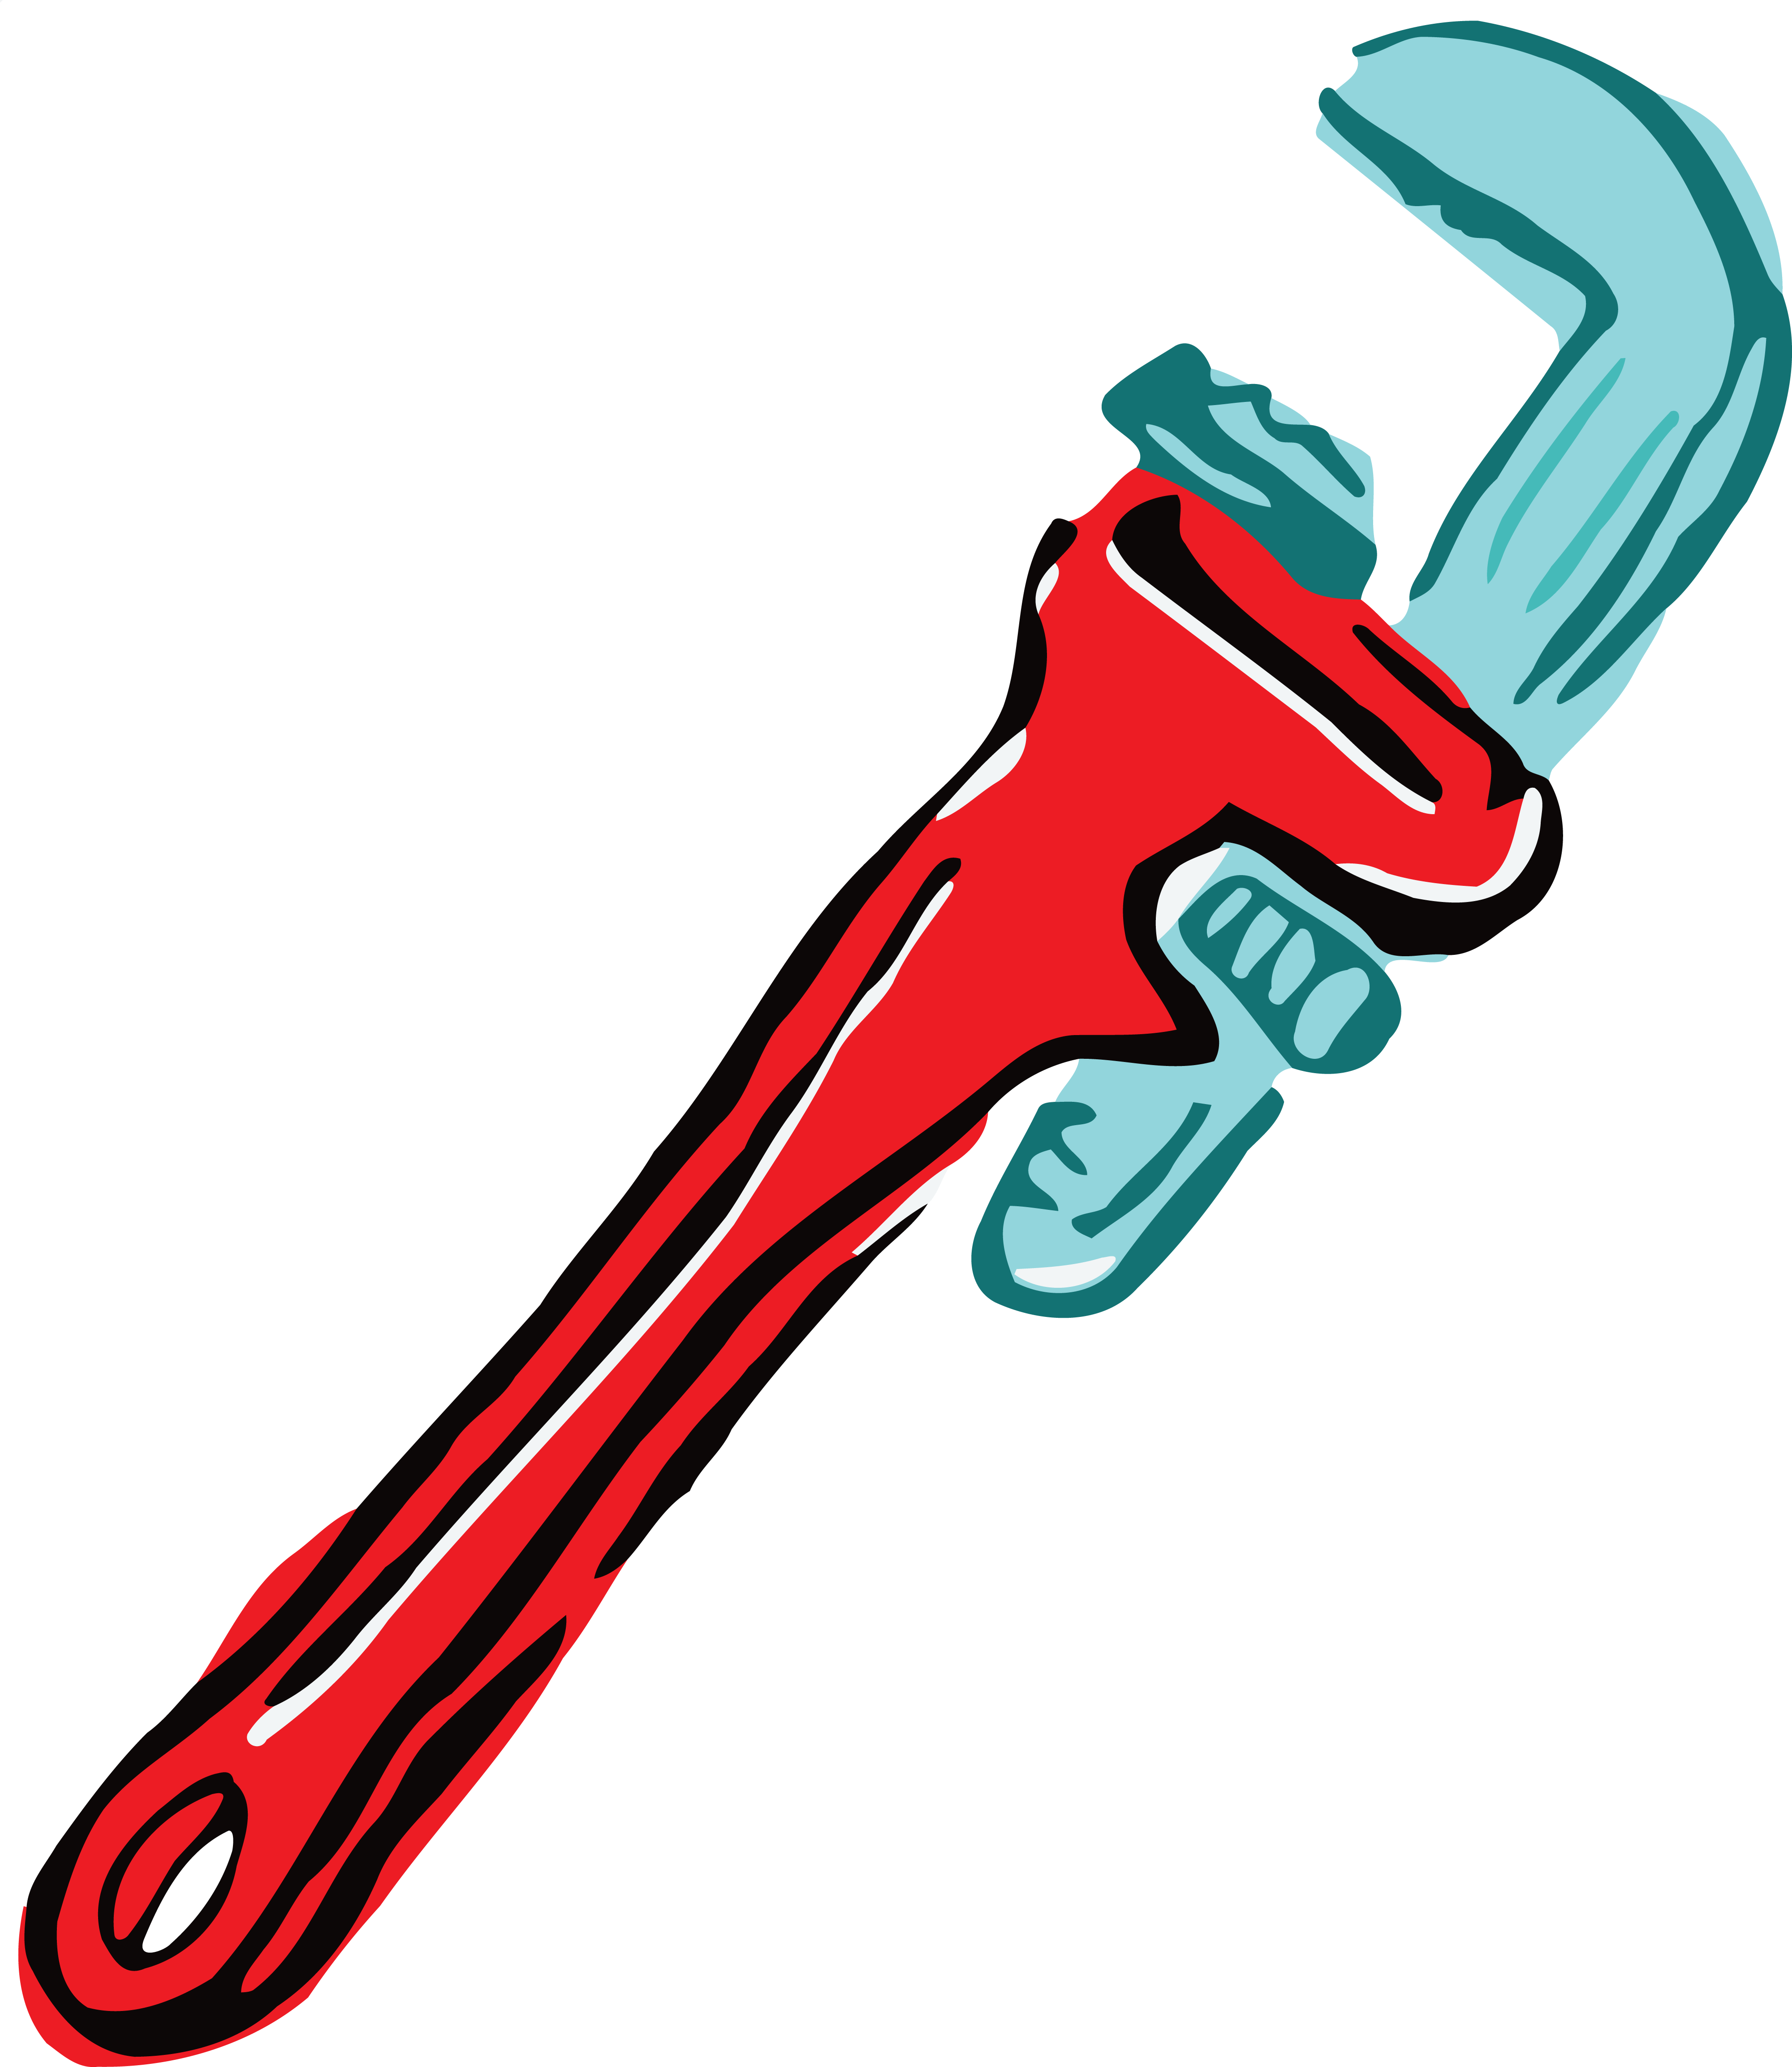 Free Clipart Of A pipe wrench